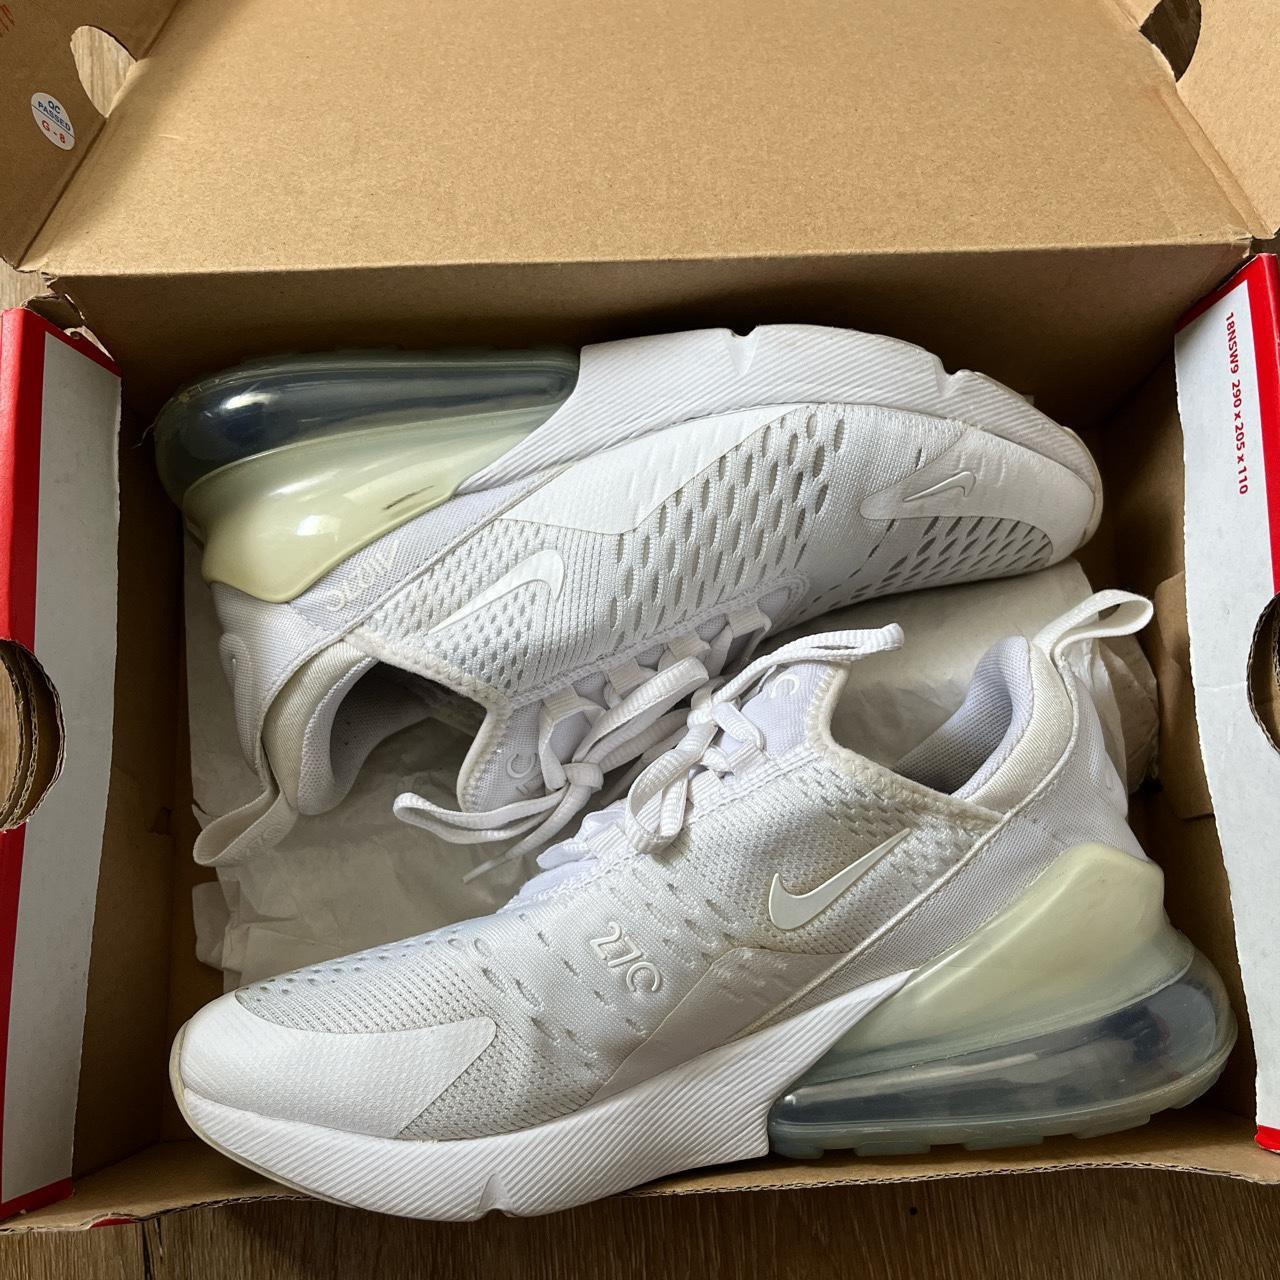 Nike Air Max 270 Size: 5 Box included #nike... - Depop